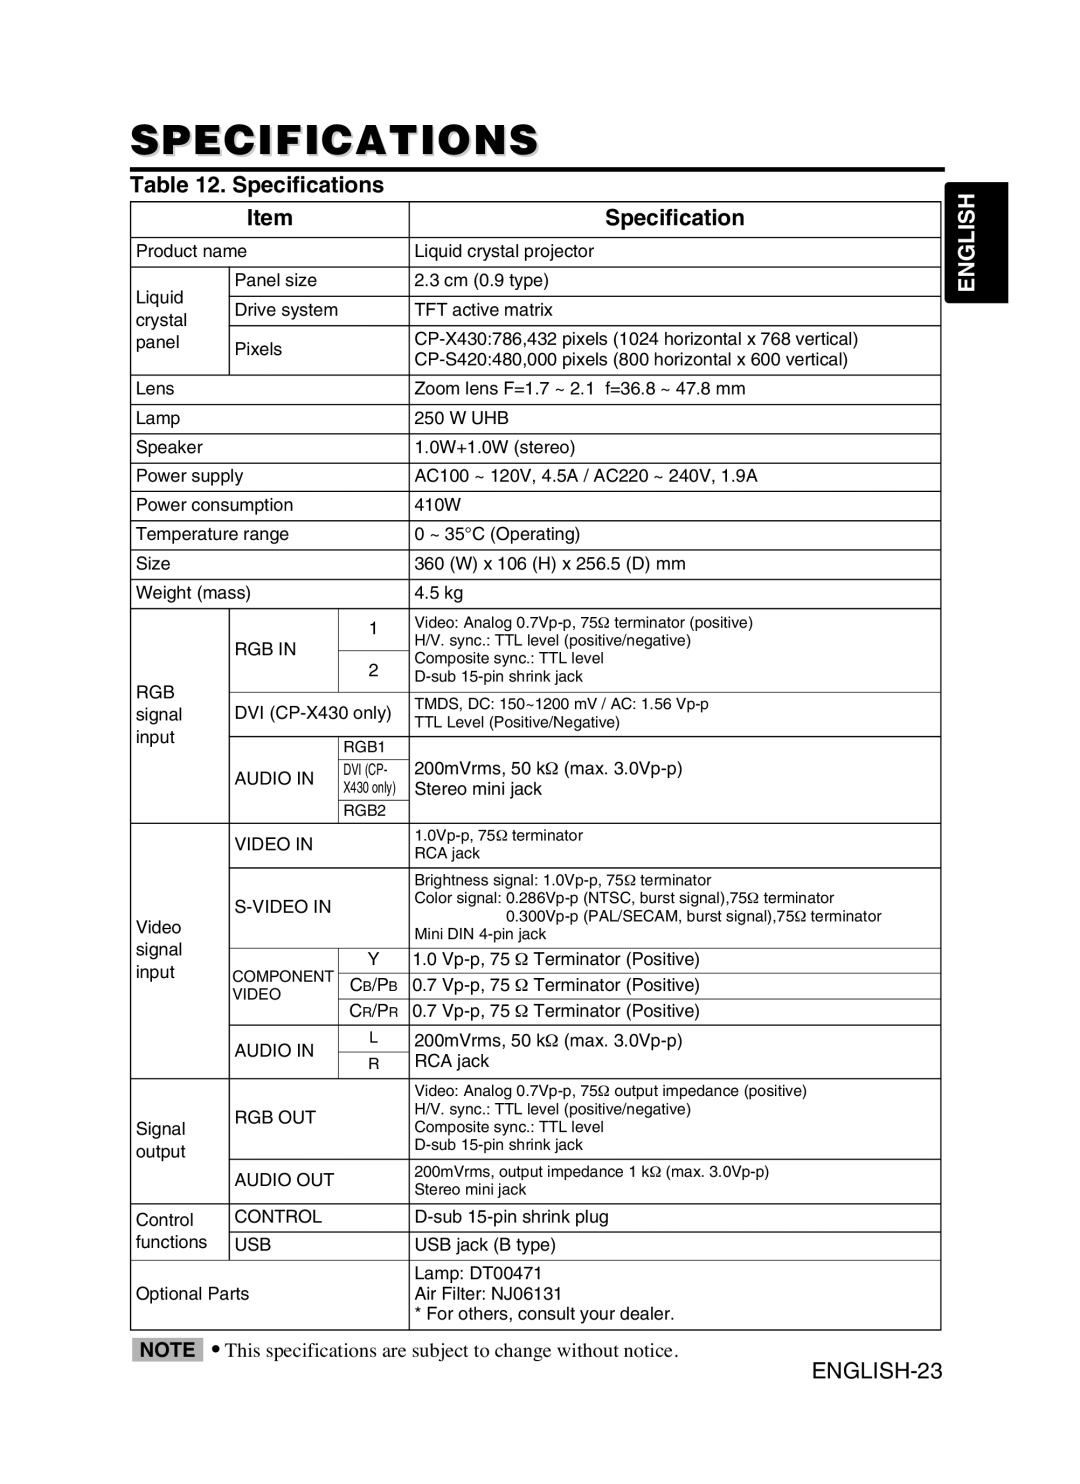 Dukane 8053 user manual Specifications, English 